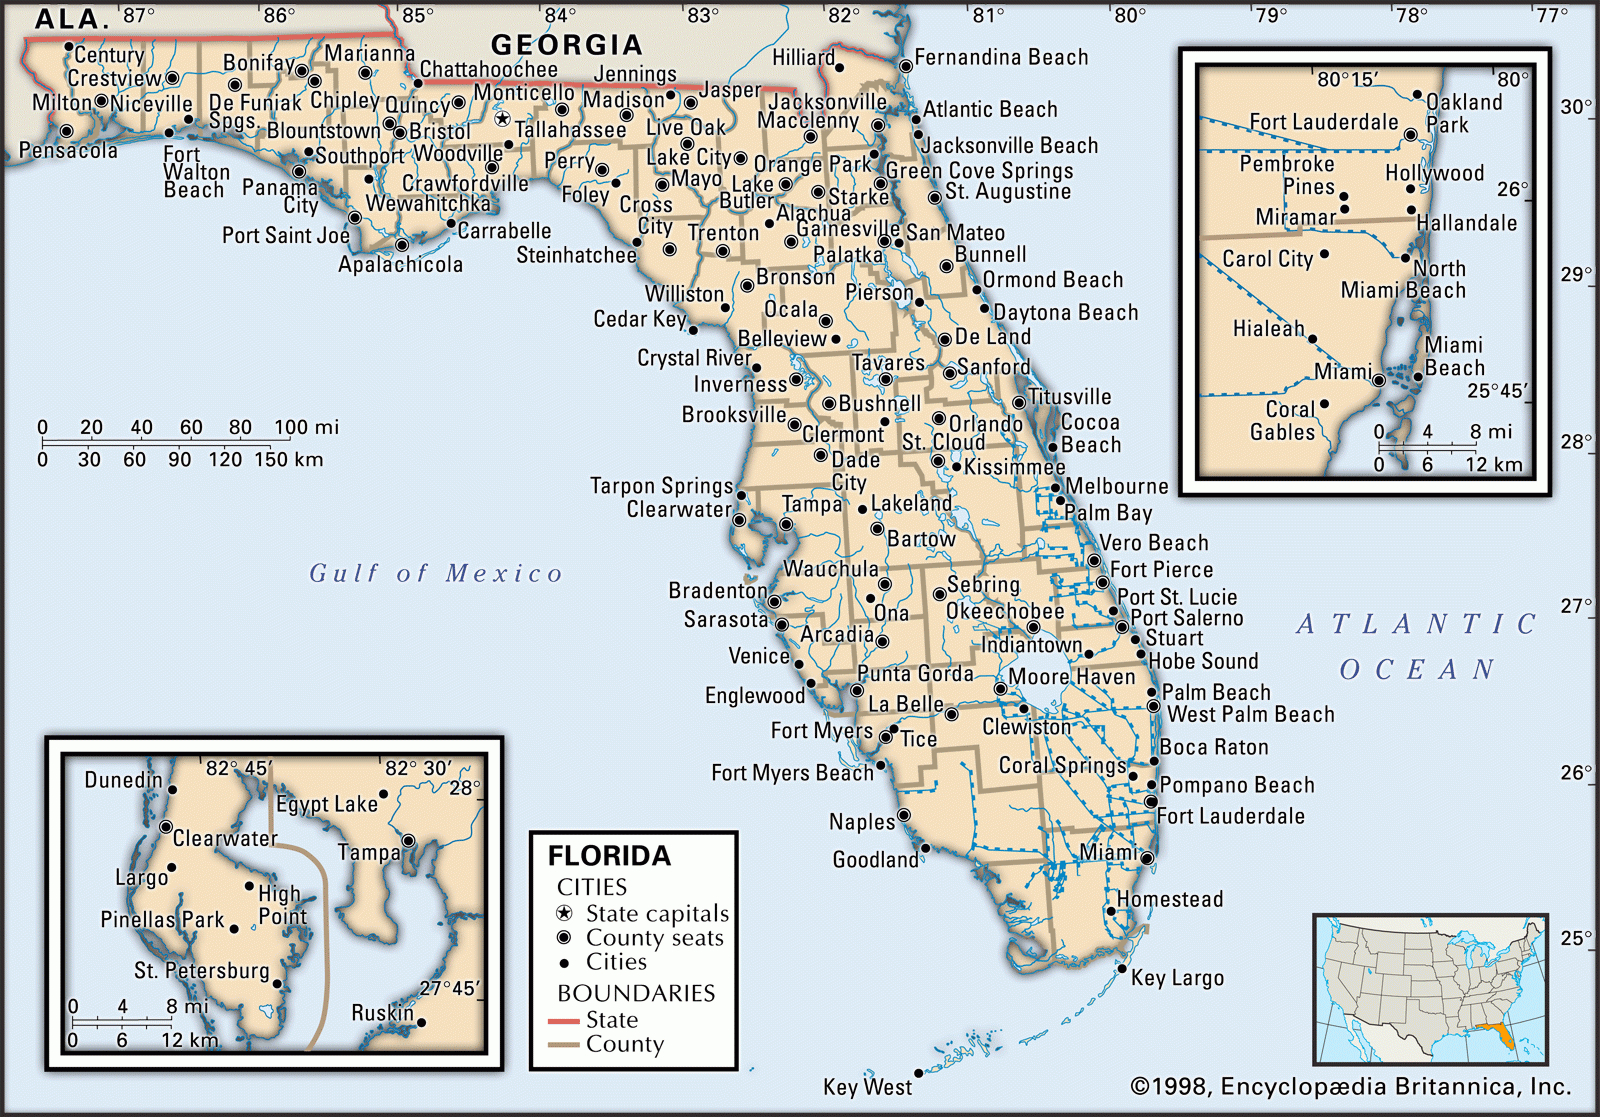 South Florida Region Map To Print | Florida Regions Counties Cities - Map Of Florida Counties And Cities